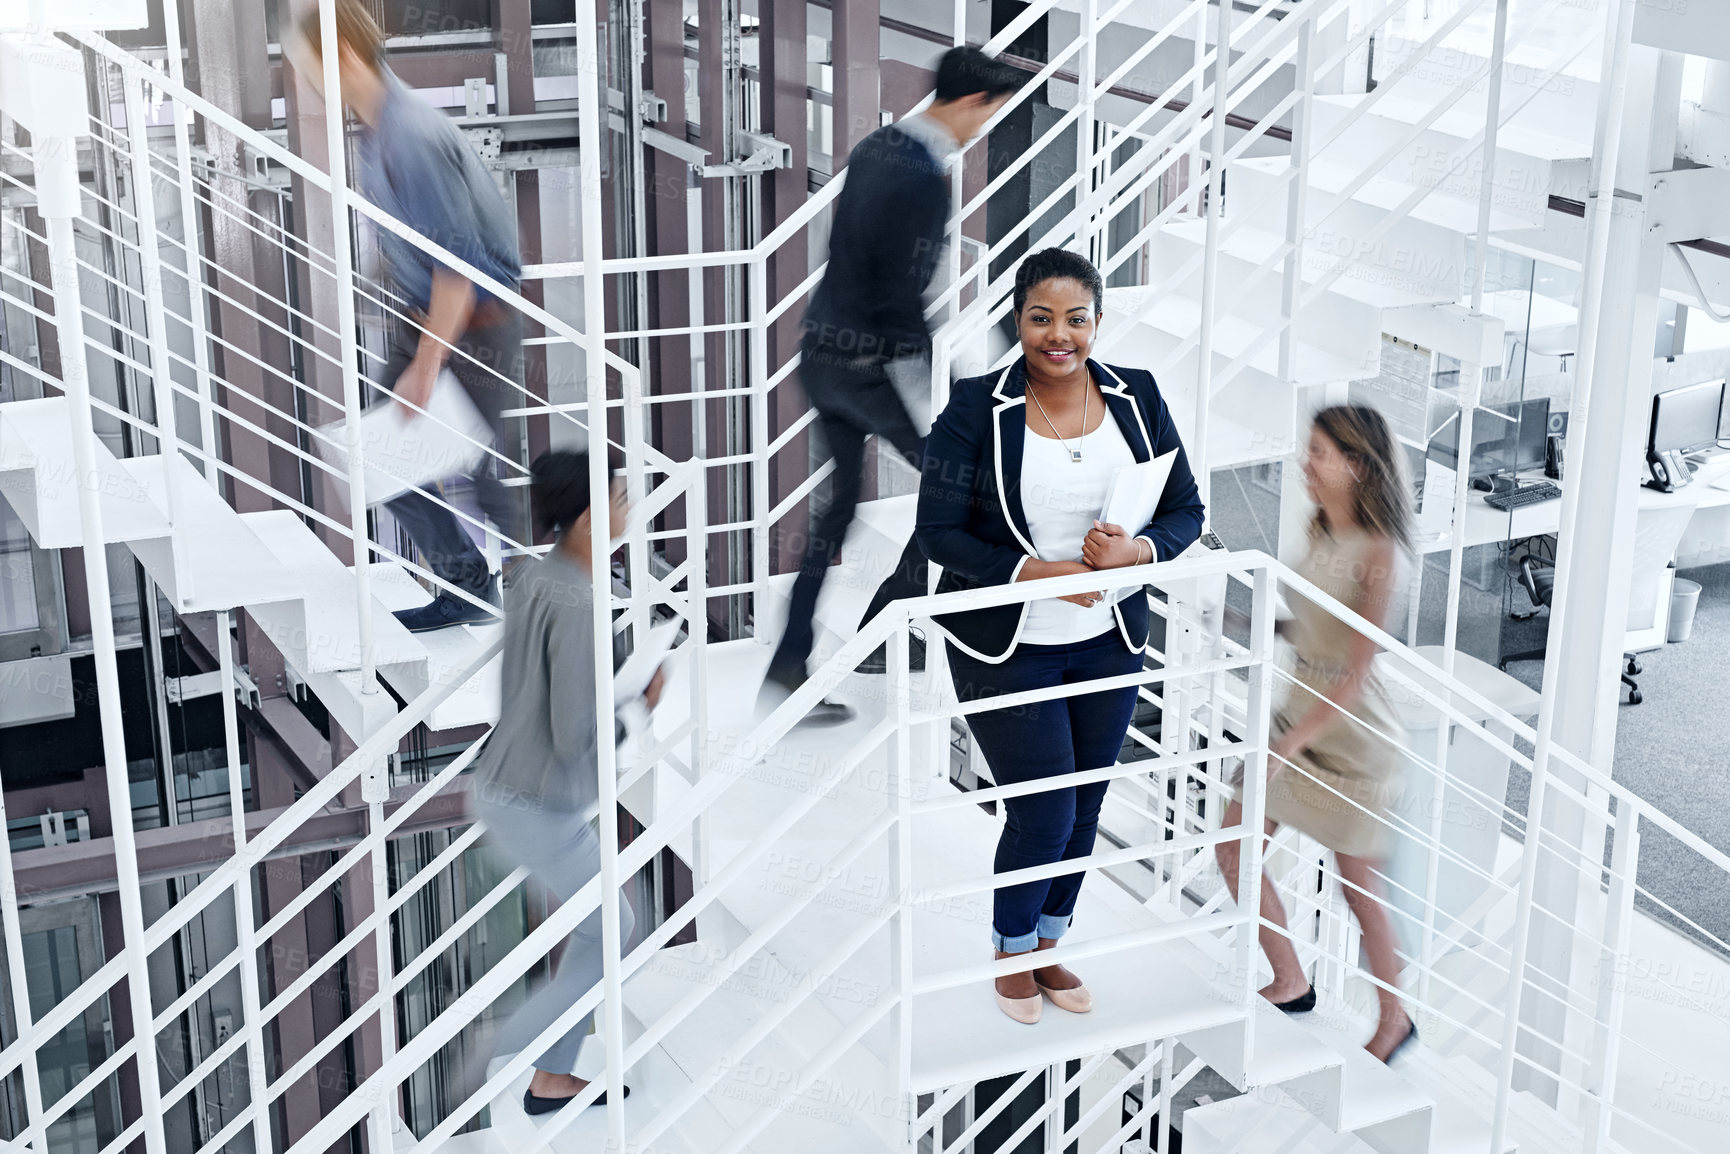 Buy stock photo Portrait of a young professional standing on a stairs with colleagues rushing around her